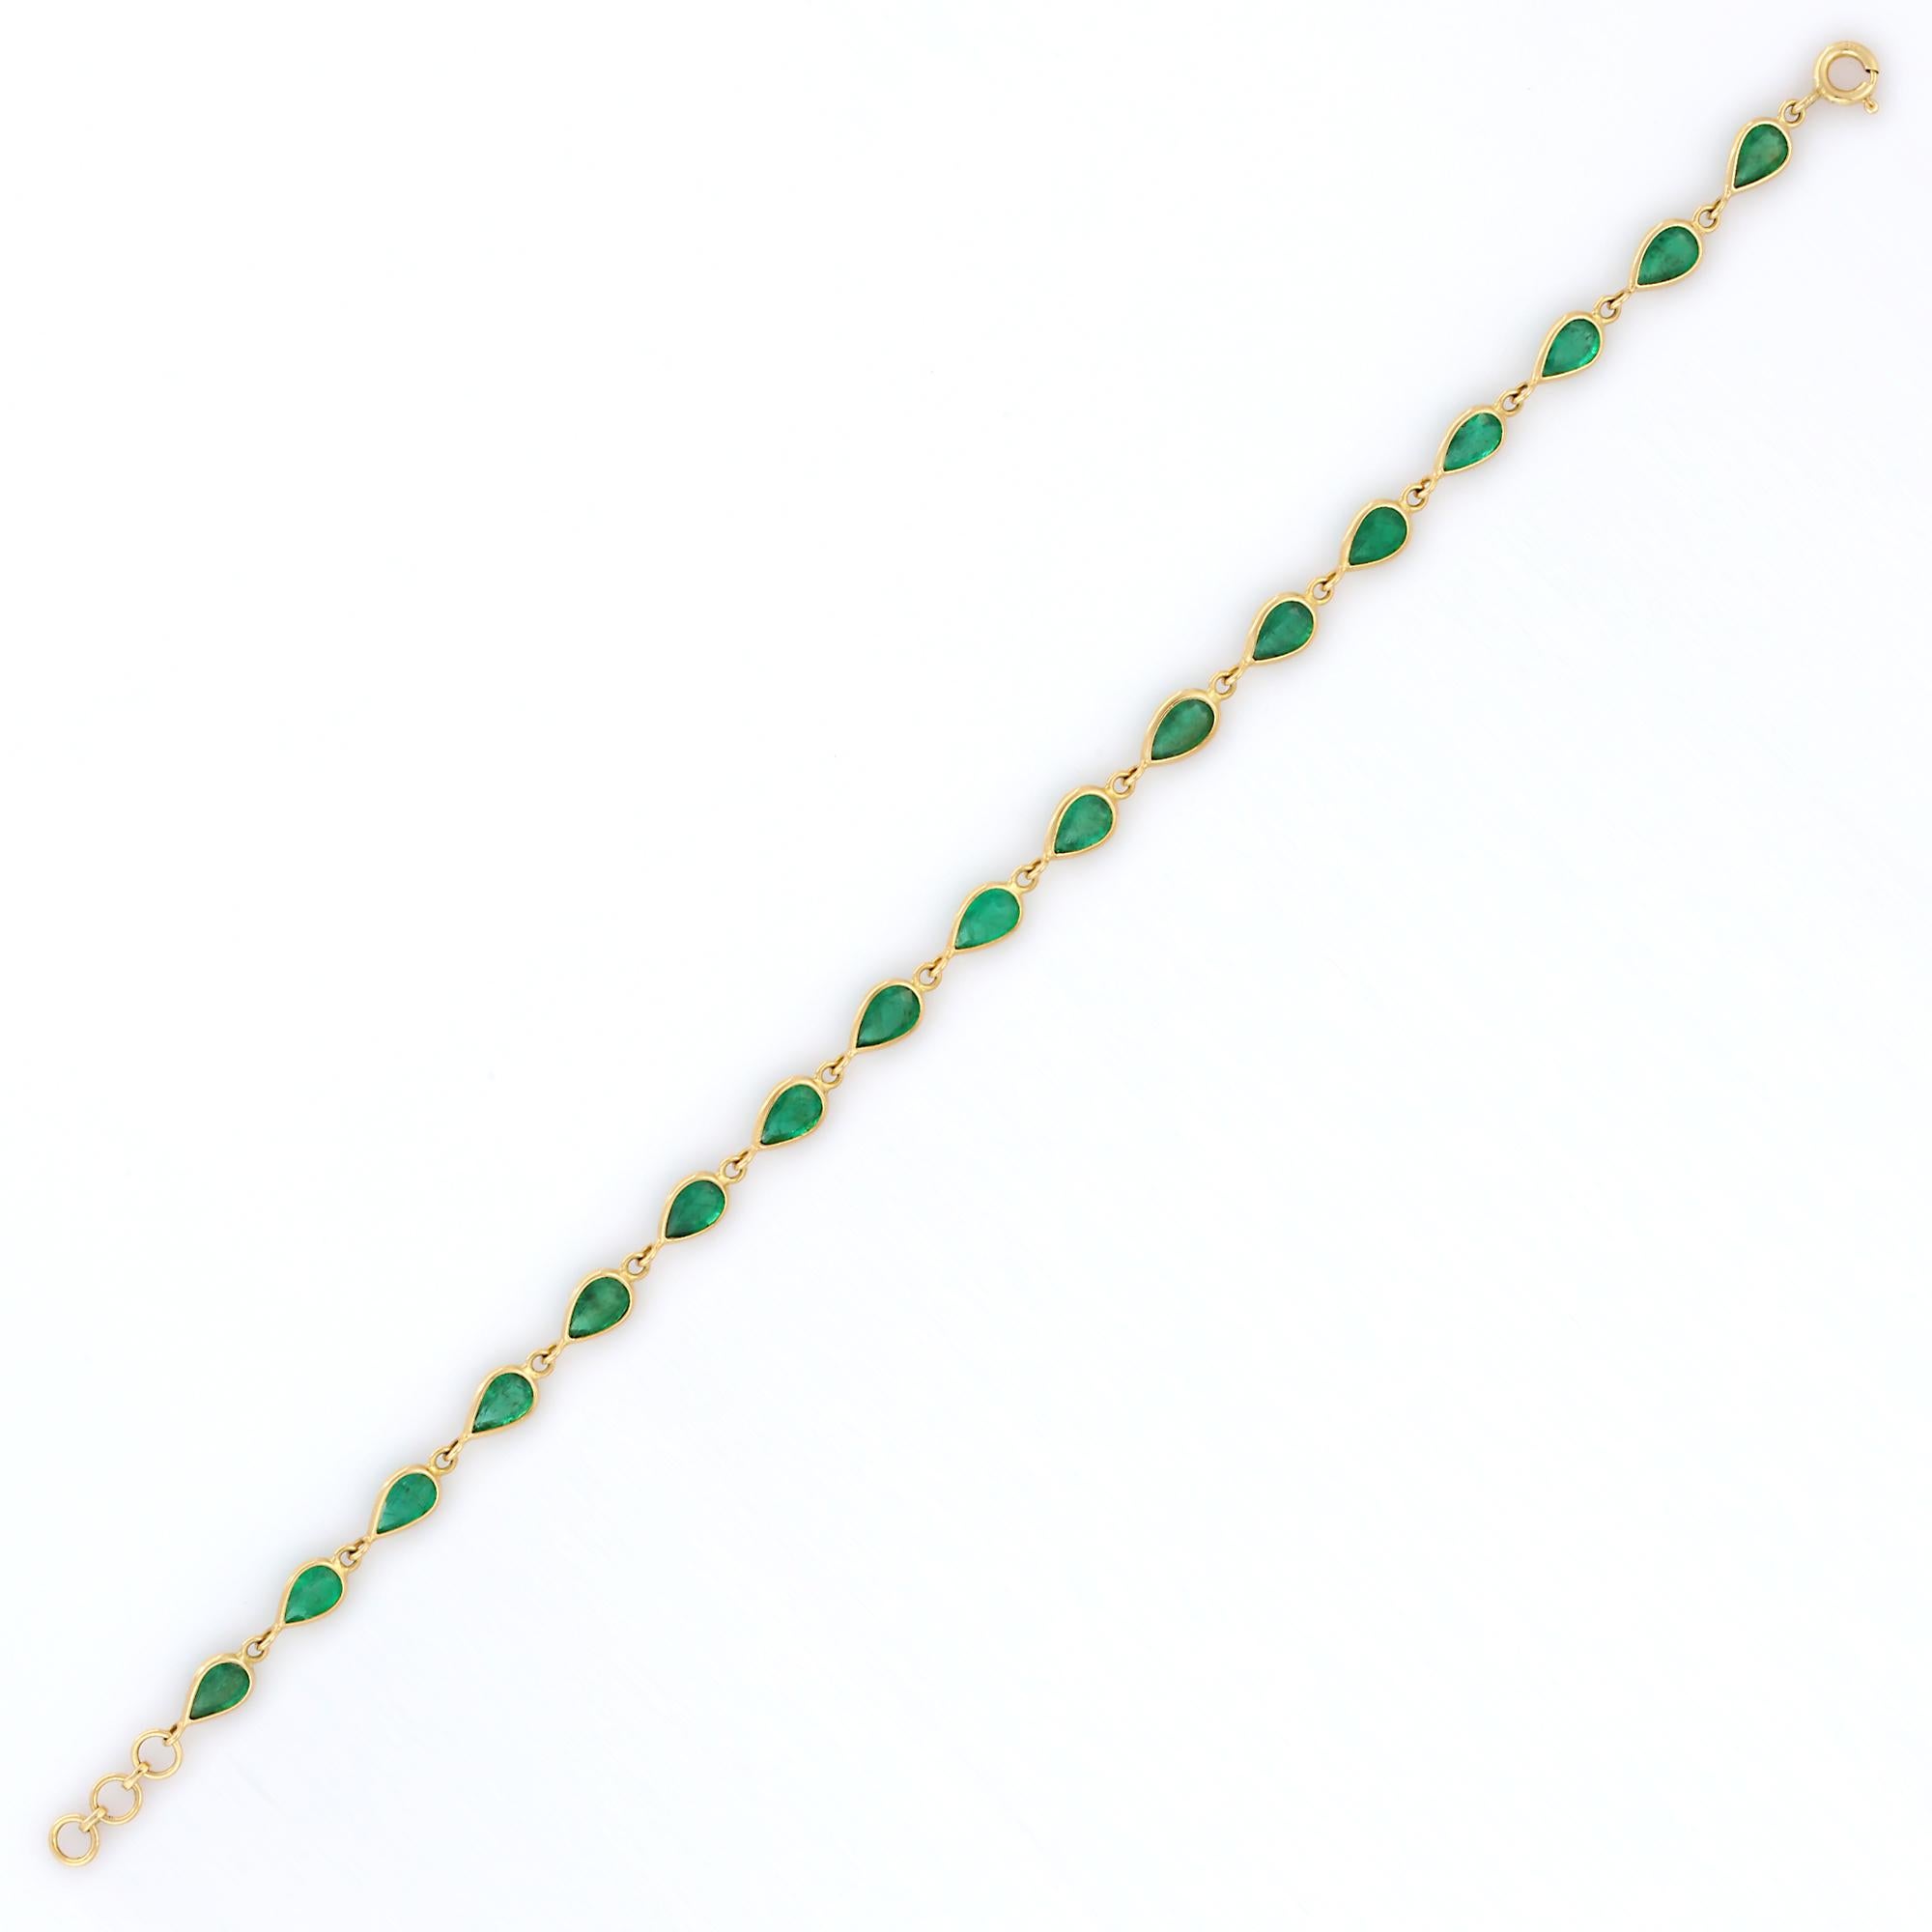 Bracelets are worn to enhance the look. Women love to look good. It is common to see a woman rocking a lovely gold bracelet on her wrist. A gold gemstone bracelet is the ultimate statement piece for every stylish woman.

Adorn your wrist with this